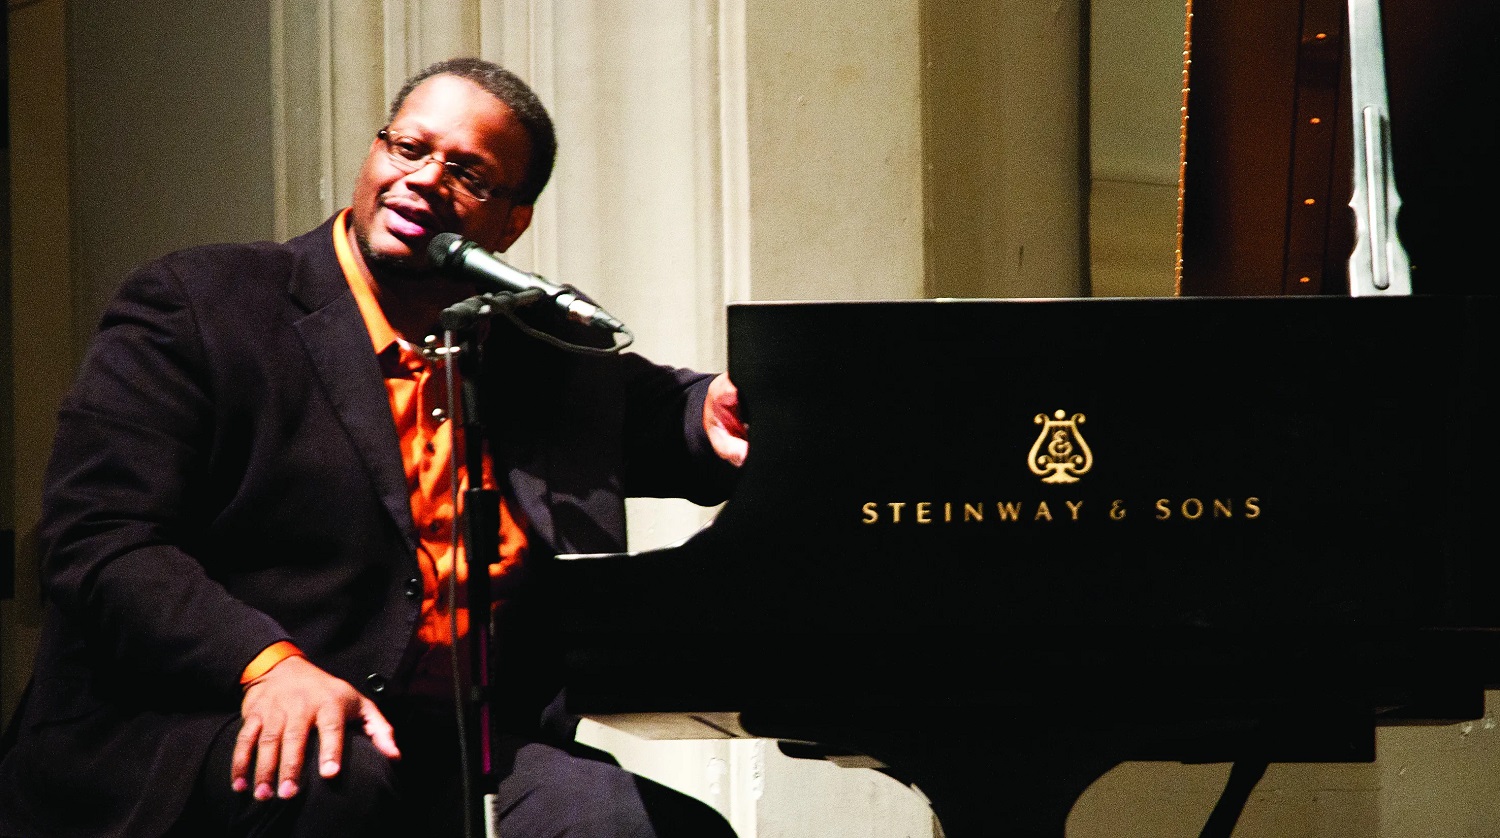 Reginald "Reggie" Thomas sits at a Steinway piano speaking into a microphone